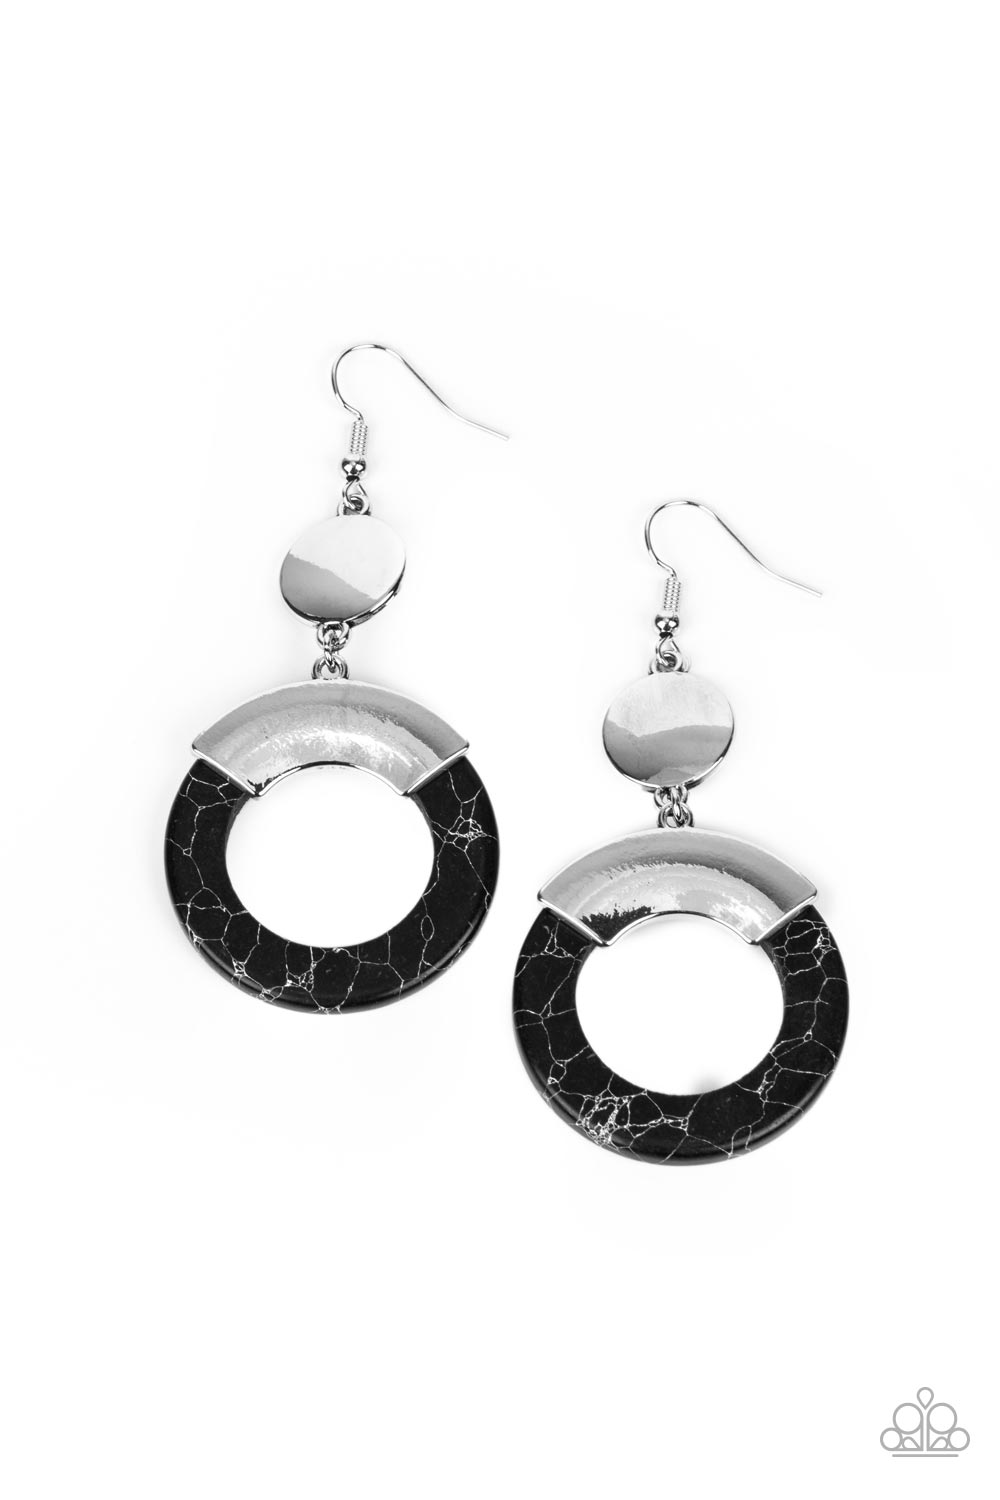 ENTRADA at Your Own Risk Black Earrings Paparazzi